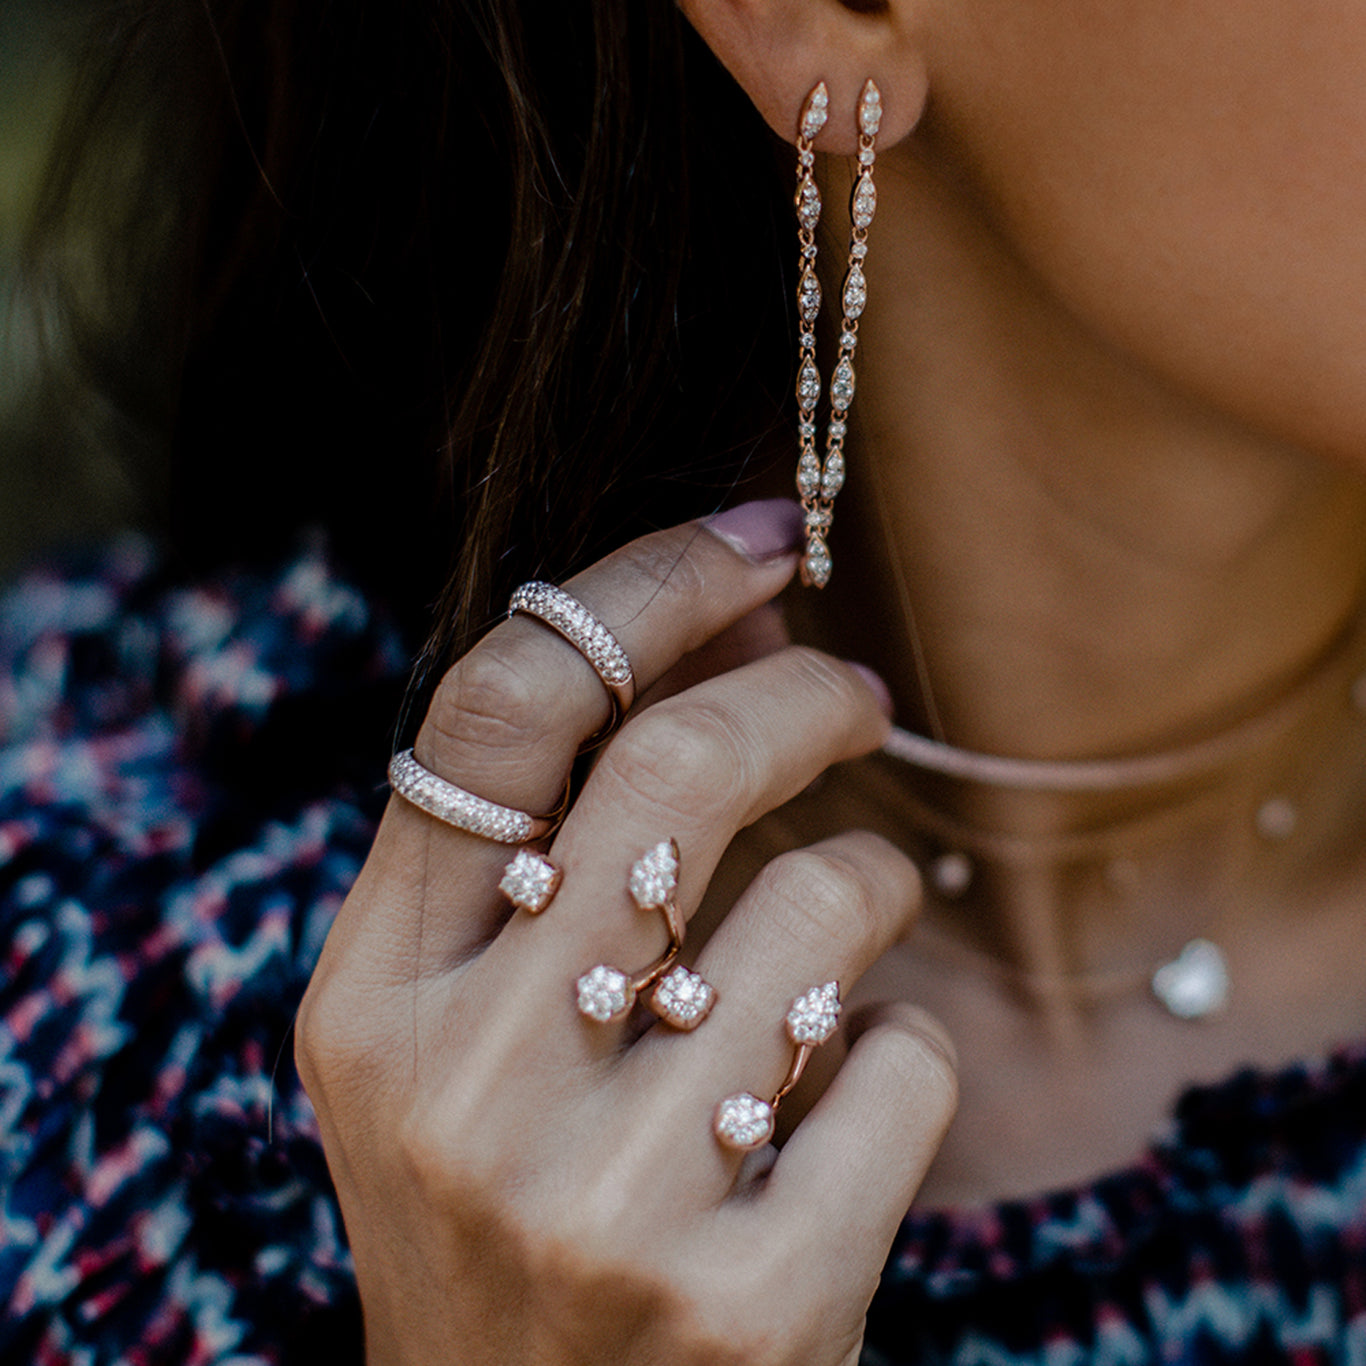 Two Throne Rings shown layered with the Olympus Ring and Cascade Earrings.